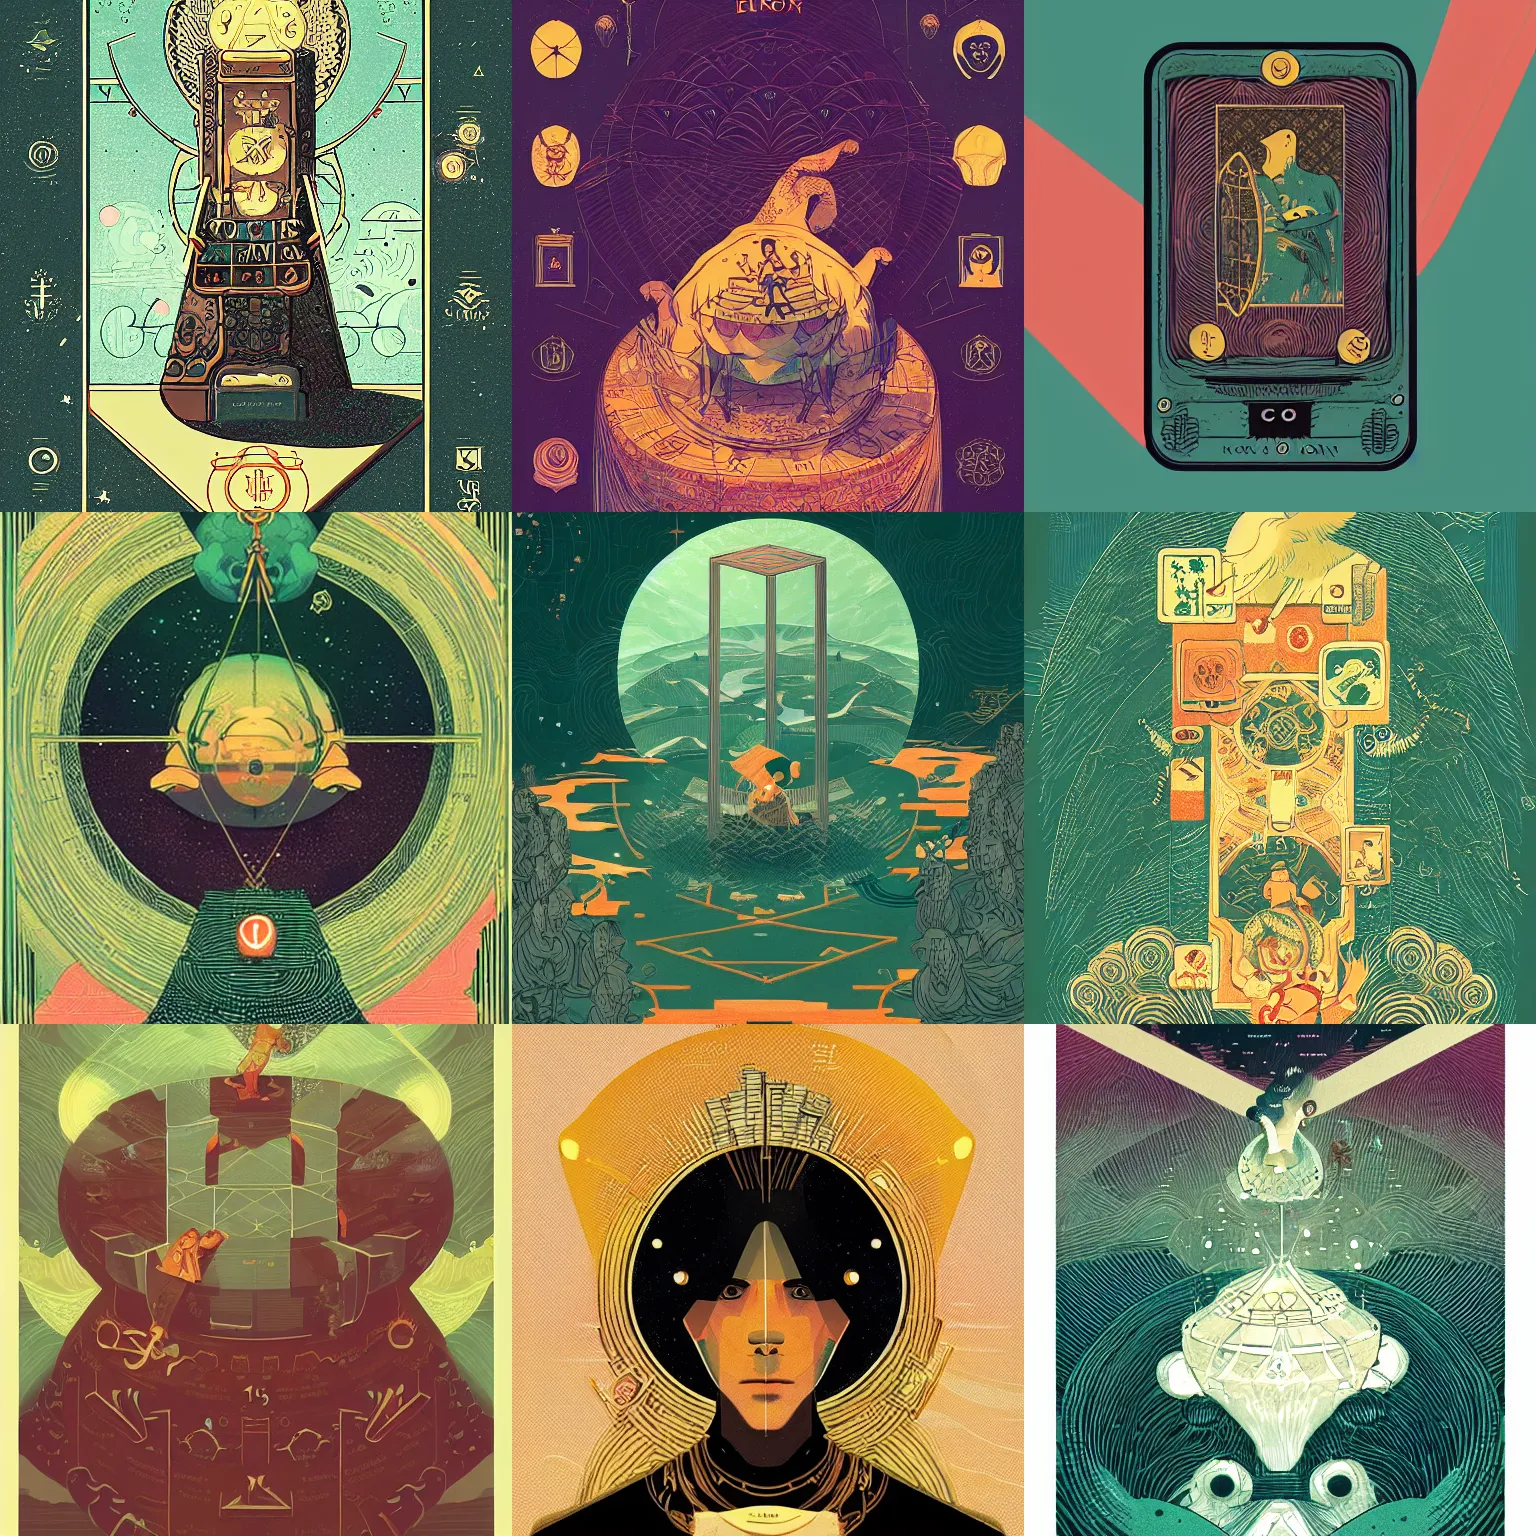 Prompt: ui designer ， icon design ， the game icon ， tarot by victo ngai